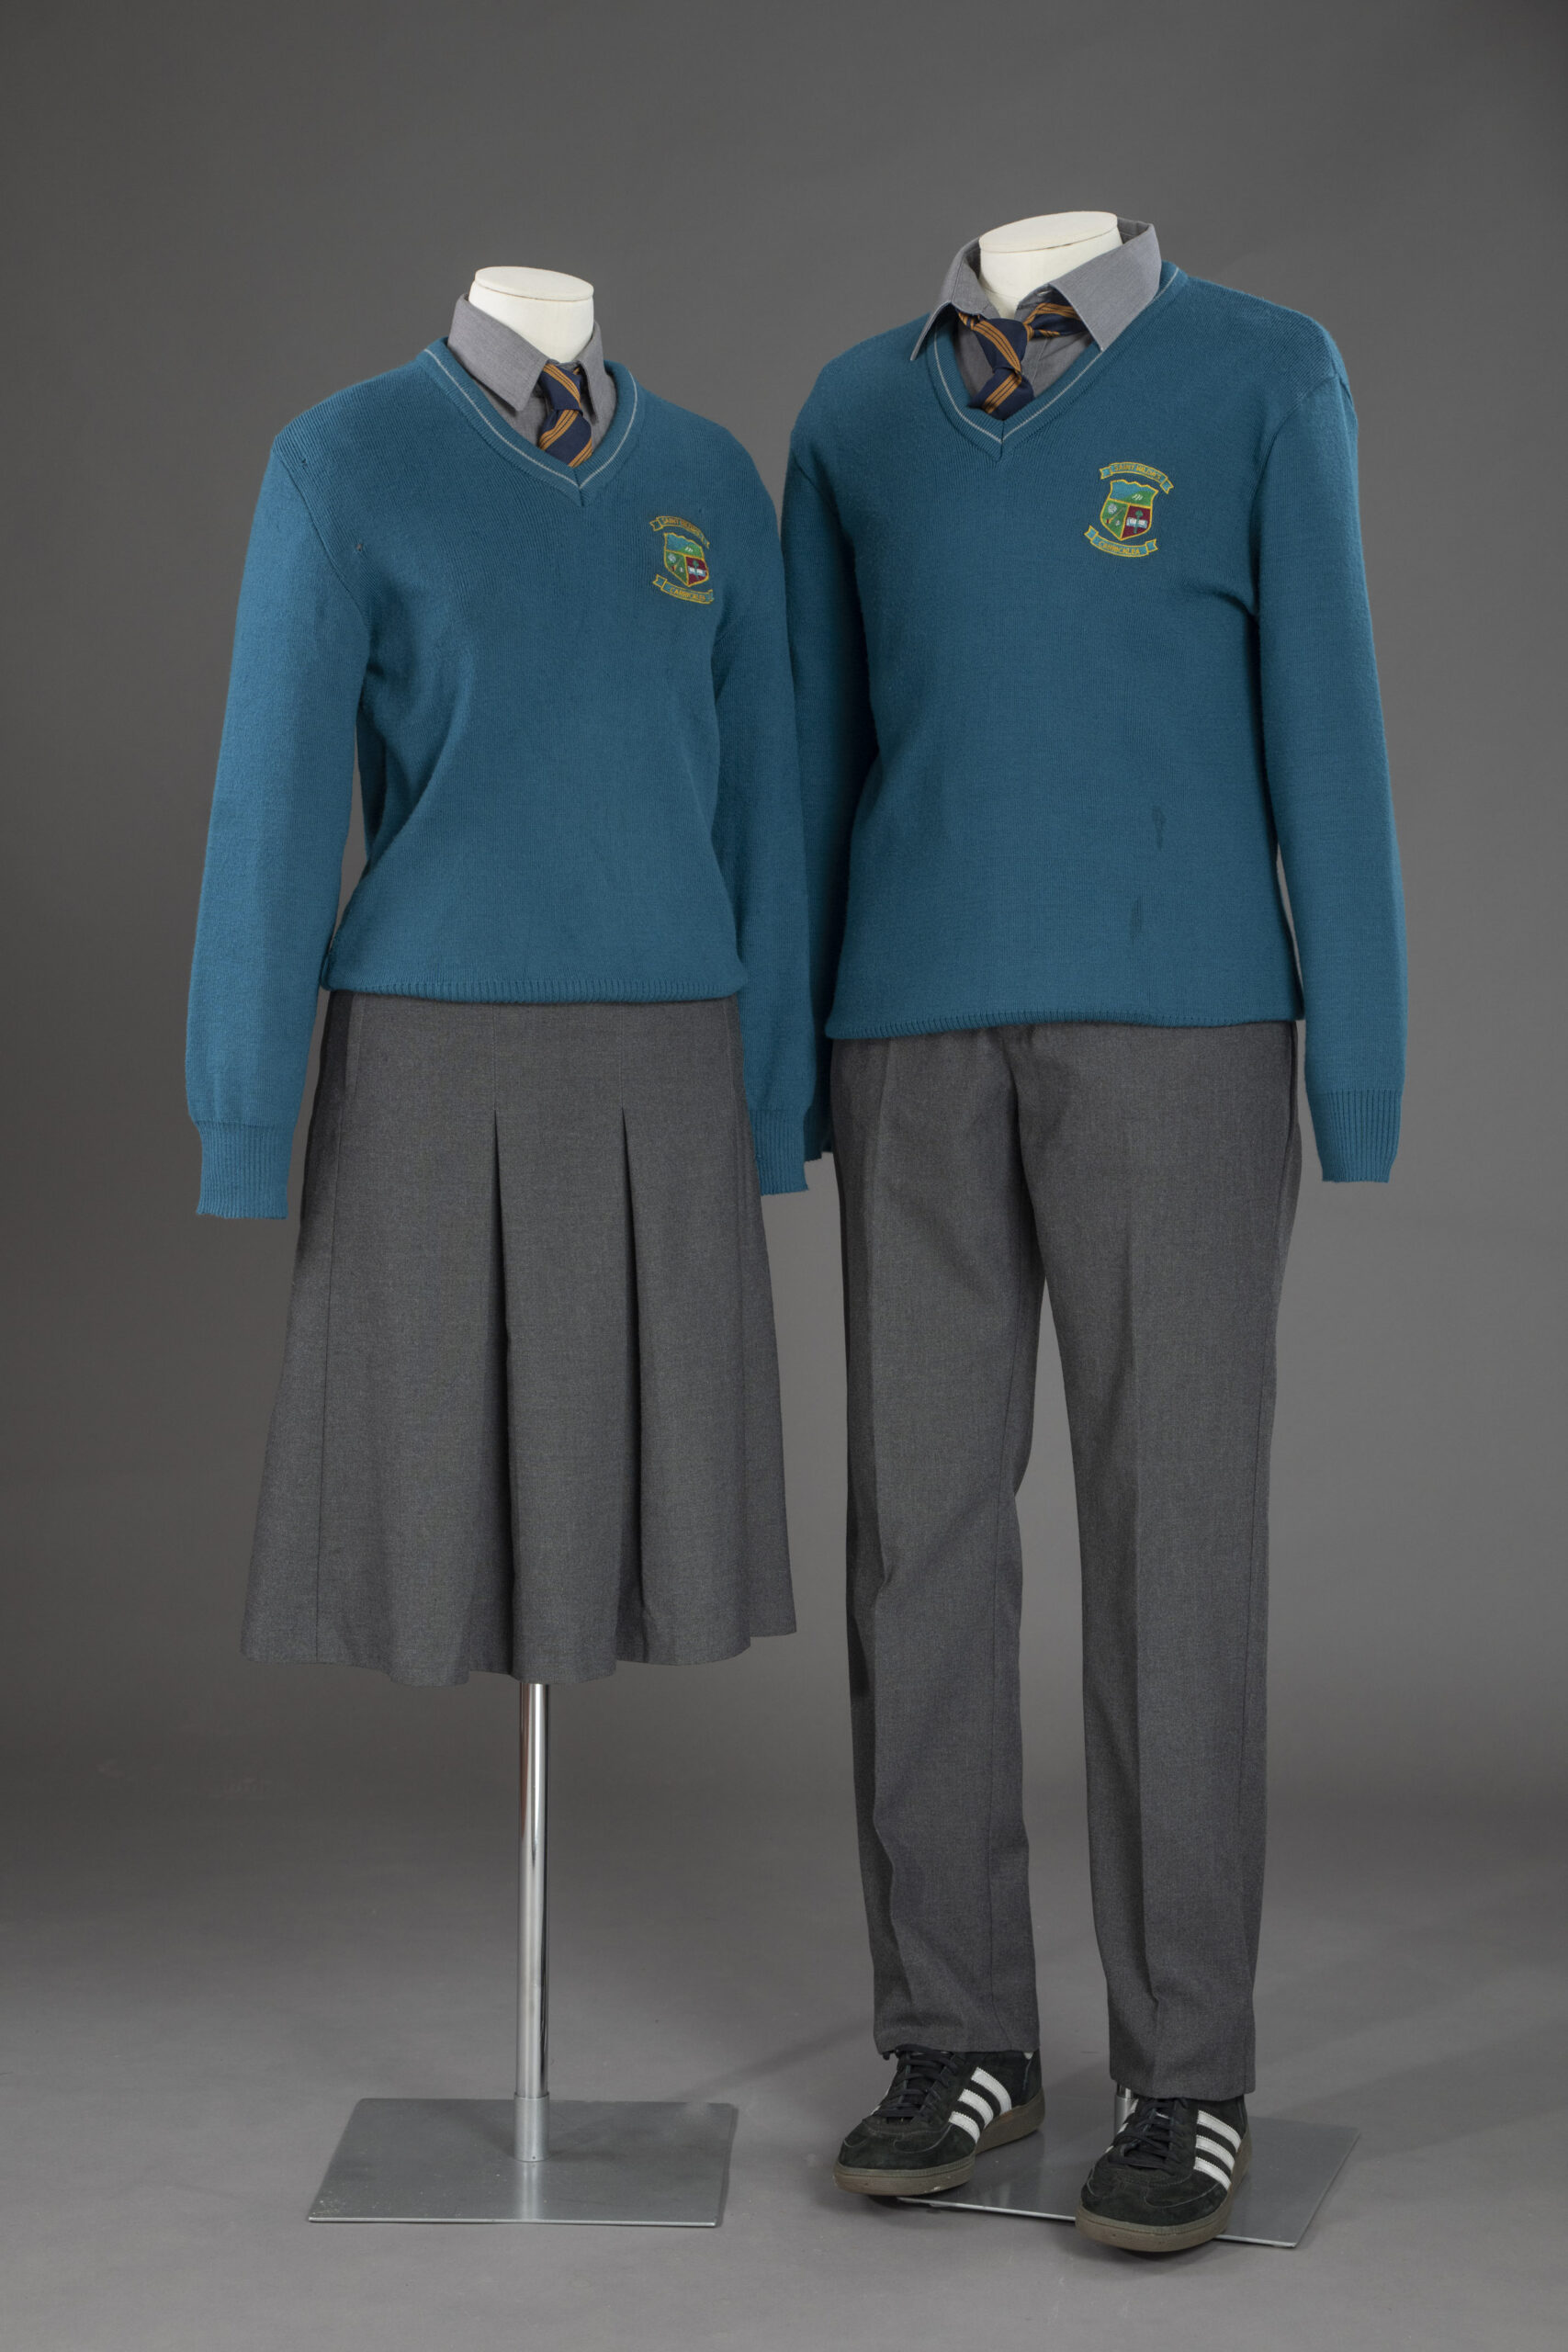 Marianne and Connell - school uniforms